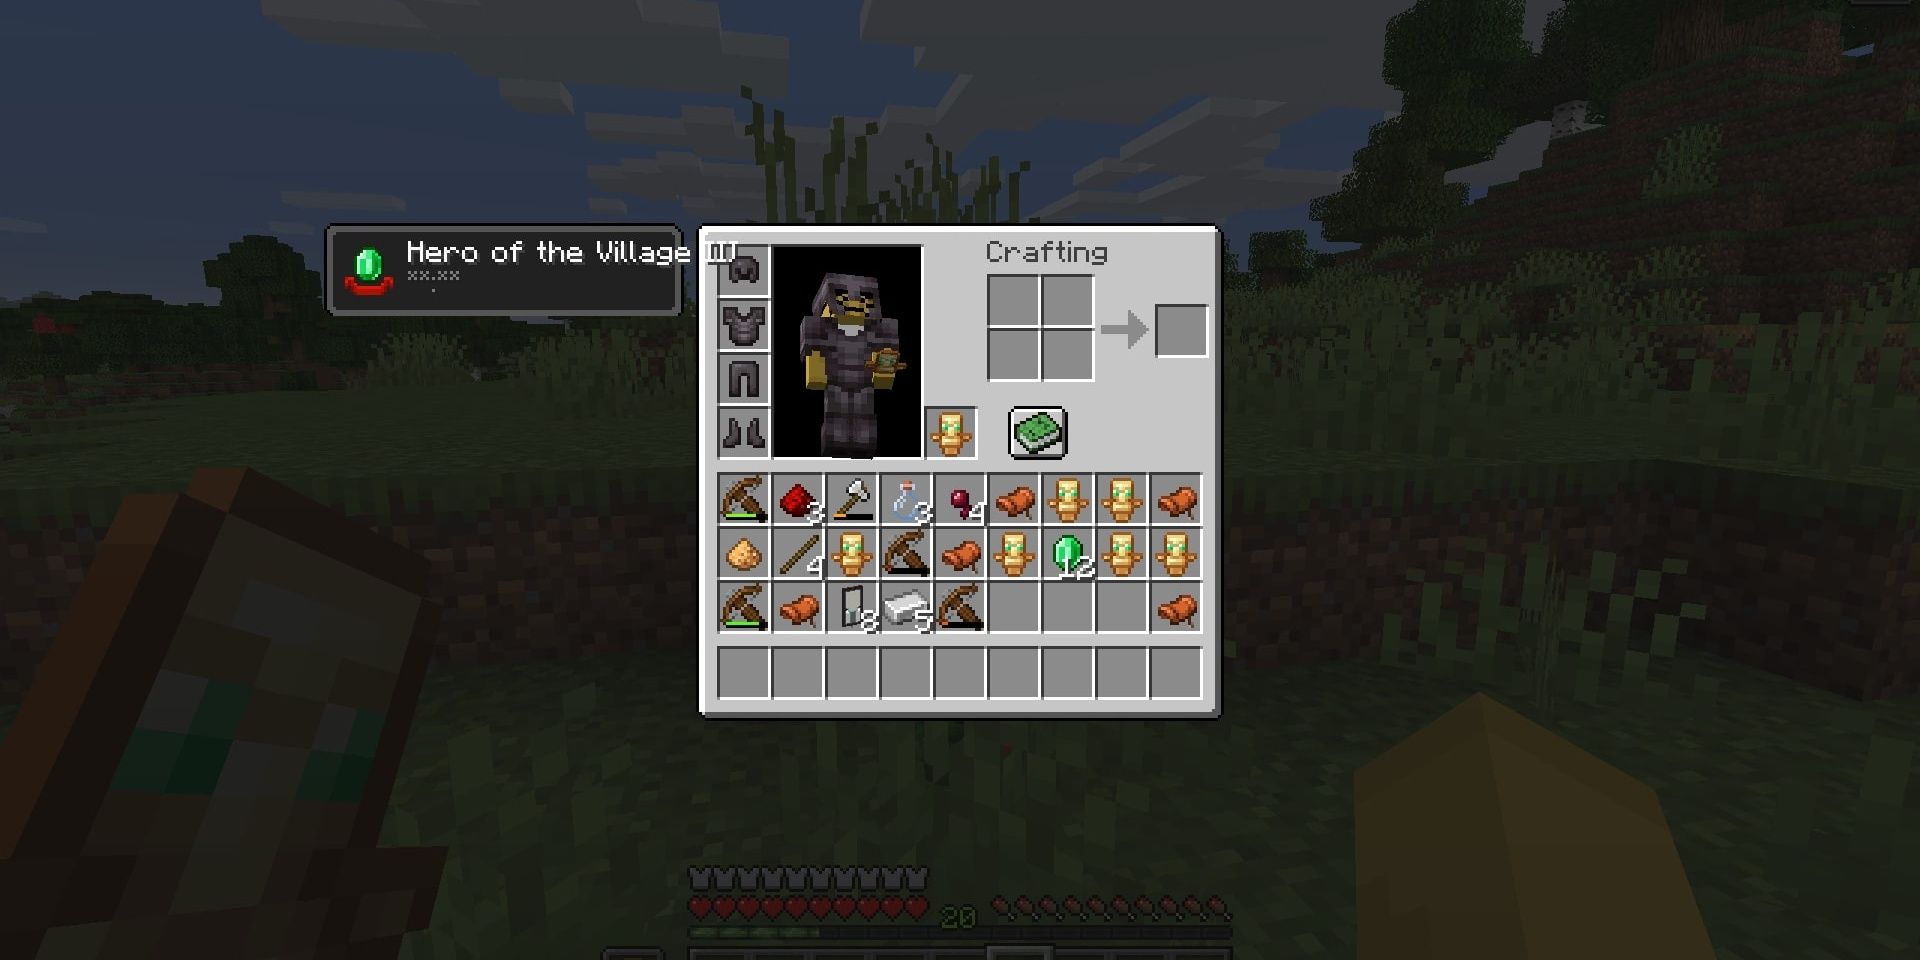 Loot that could be obtained during a raid in Minecraft